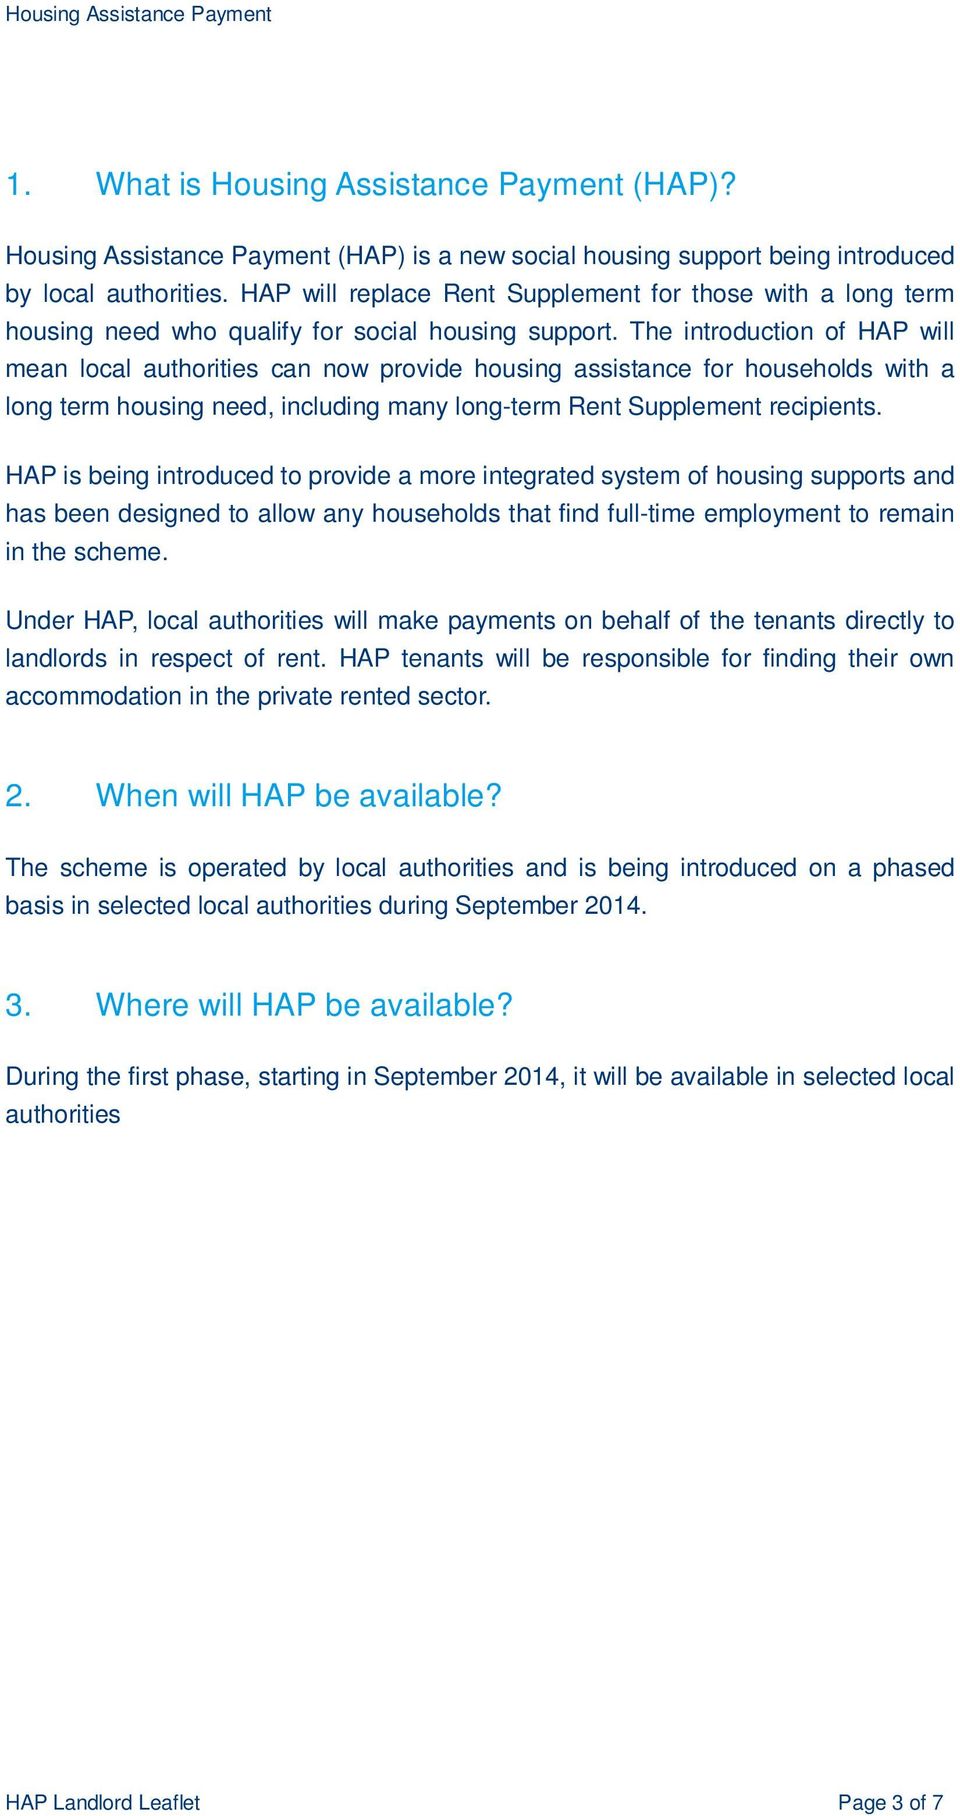 The introduction of HAP will mean local authorities can now provide housing assistance for households with a long term housing need, including many long-term Rent Supplement recipients.